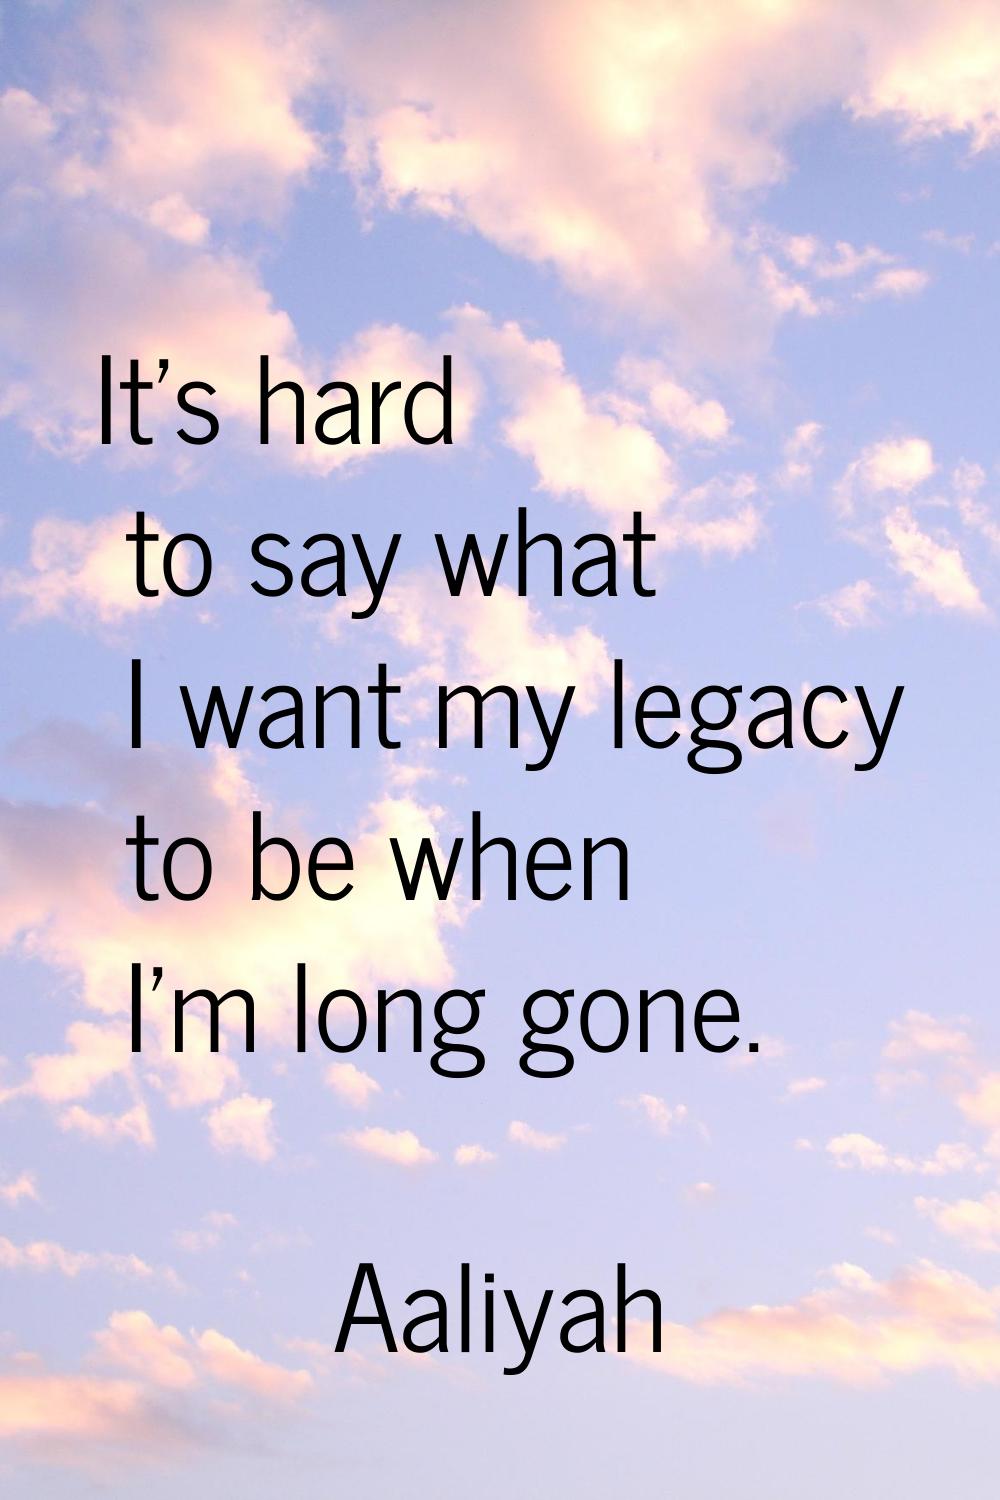 It's hard to say what I want my legacy to be when I'm long gone.